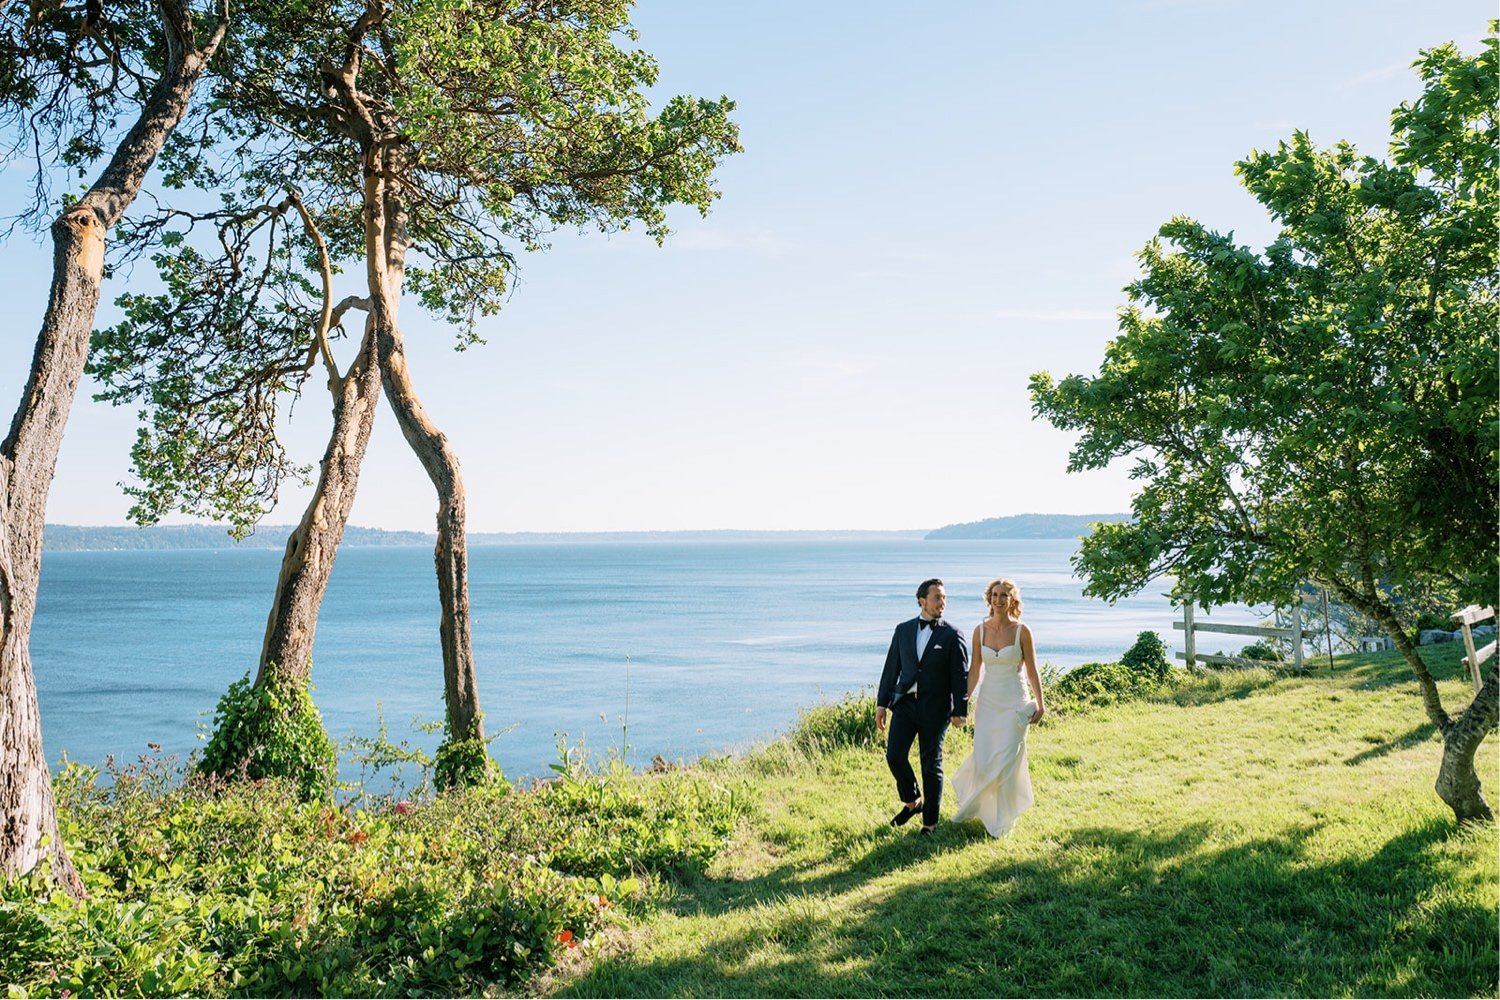 181_Vashon Field and Pond wedding with candid and editorial style photos.jpg